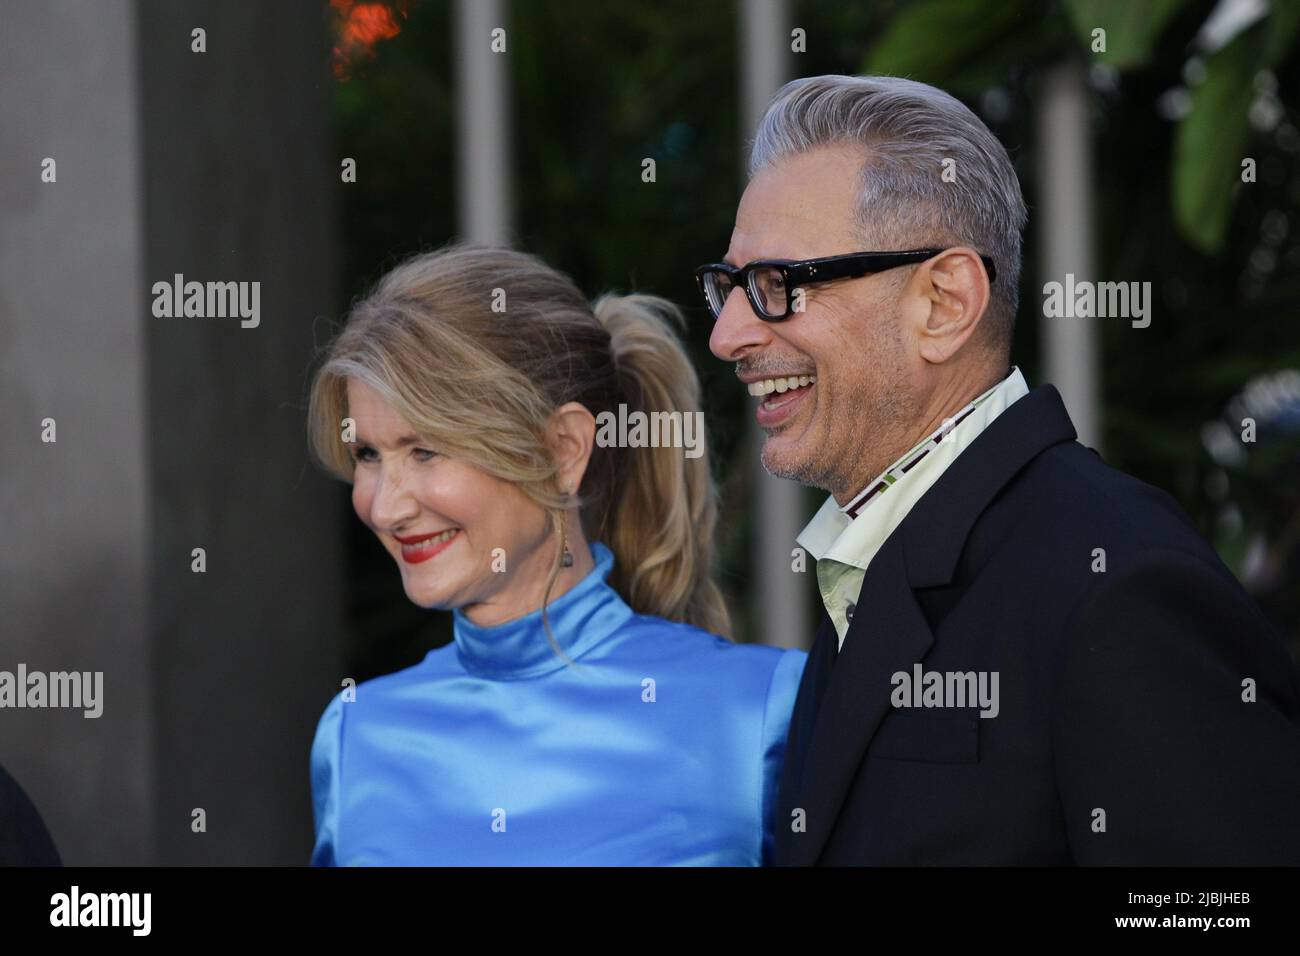 Los Angeles, USA. 07th June, 2022. Laura Dern, Jeff Goldblum at 'Jurassic World: Dominion' World Premiere held at the TCL Chinese Theatre, Hollywood, CA, June 6, 2022. Photo Credit: Joseph Martinez/PictureLux Credit: PictureLux/The Hollywood Archive/Alamy Live News Stock Photo